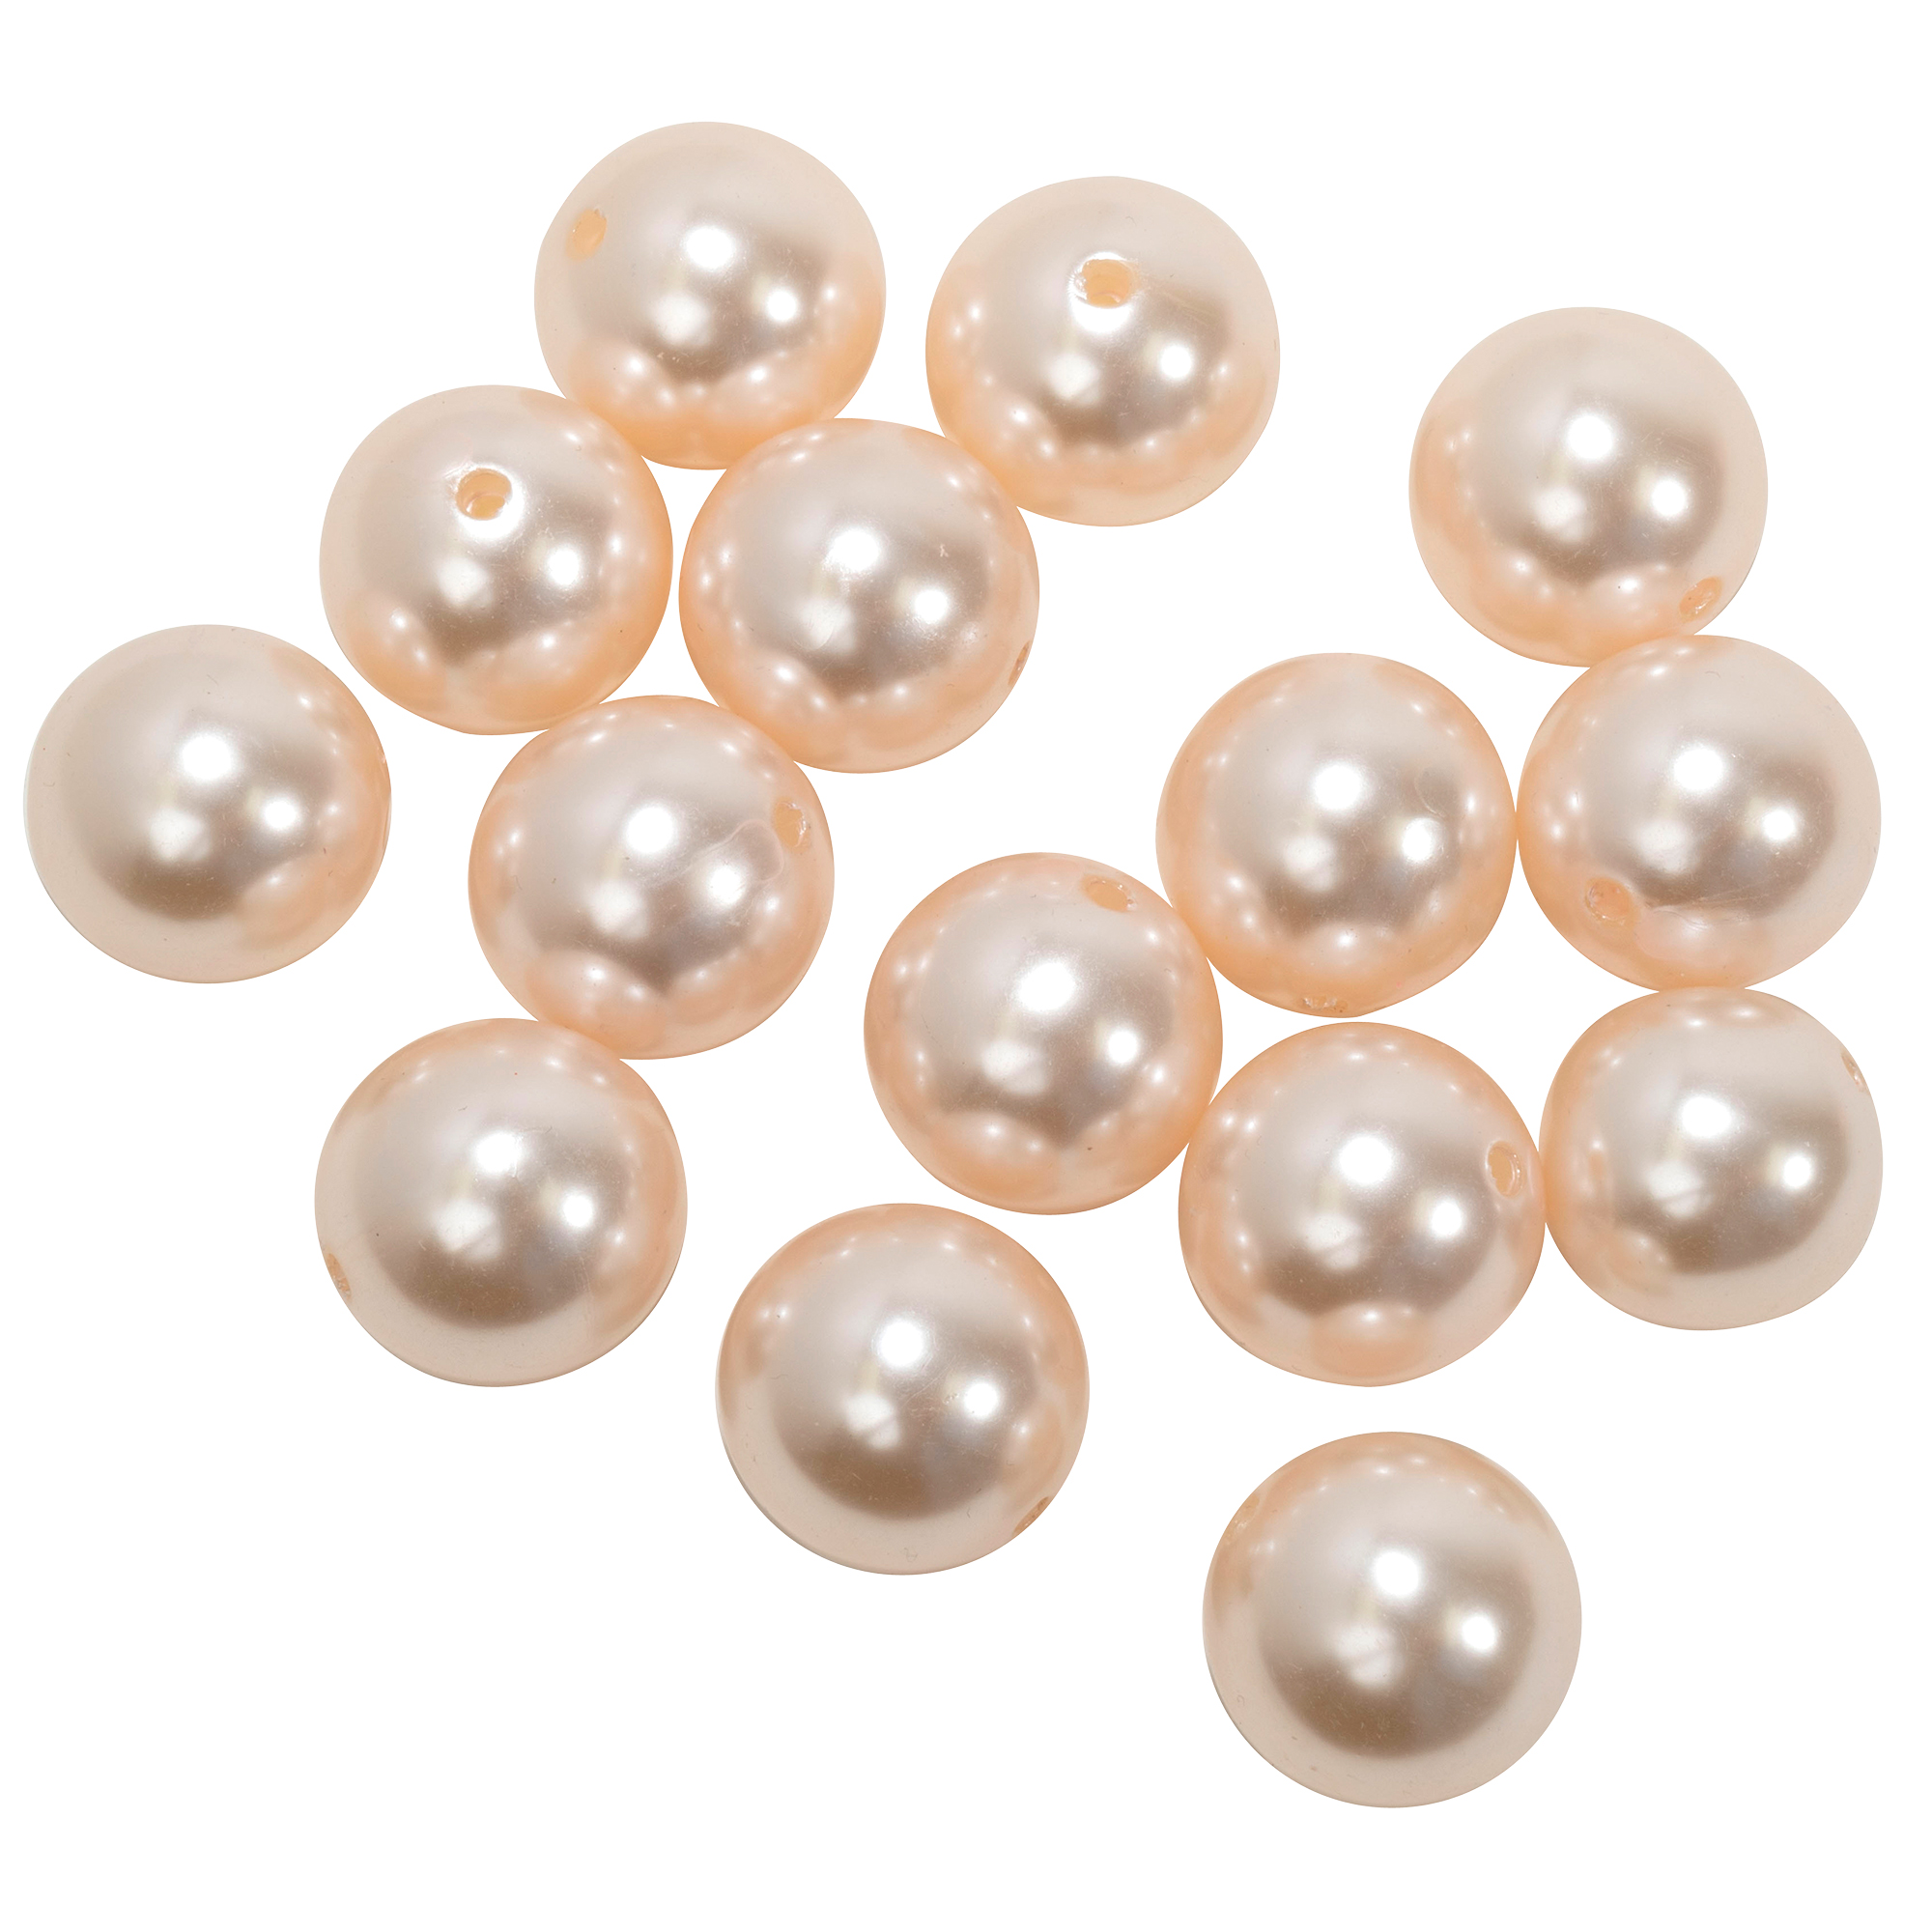 30mm Craft Pearl Beads With Hole 454g/Bag - Blush